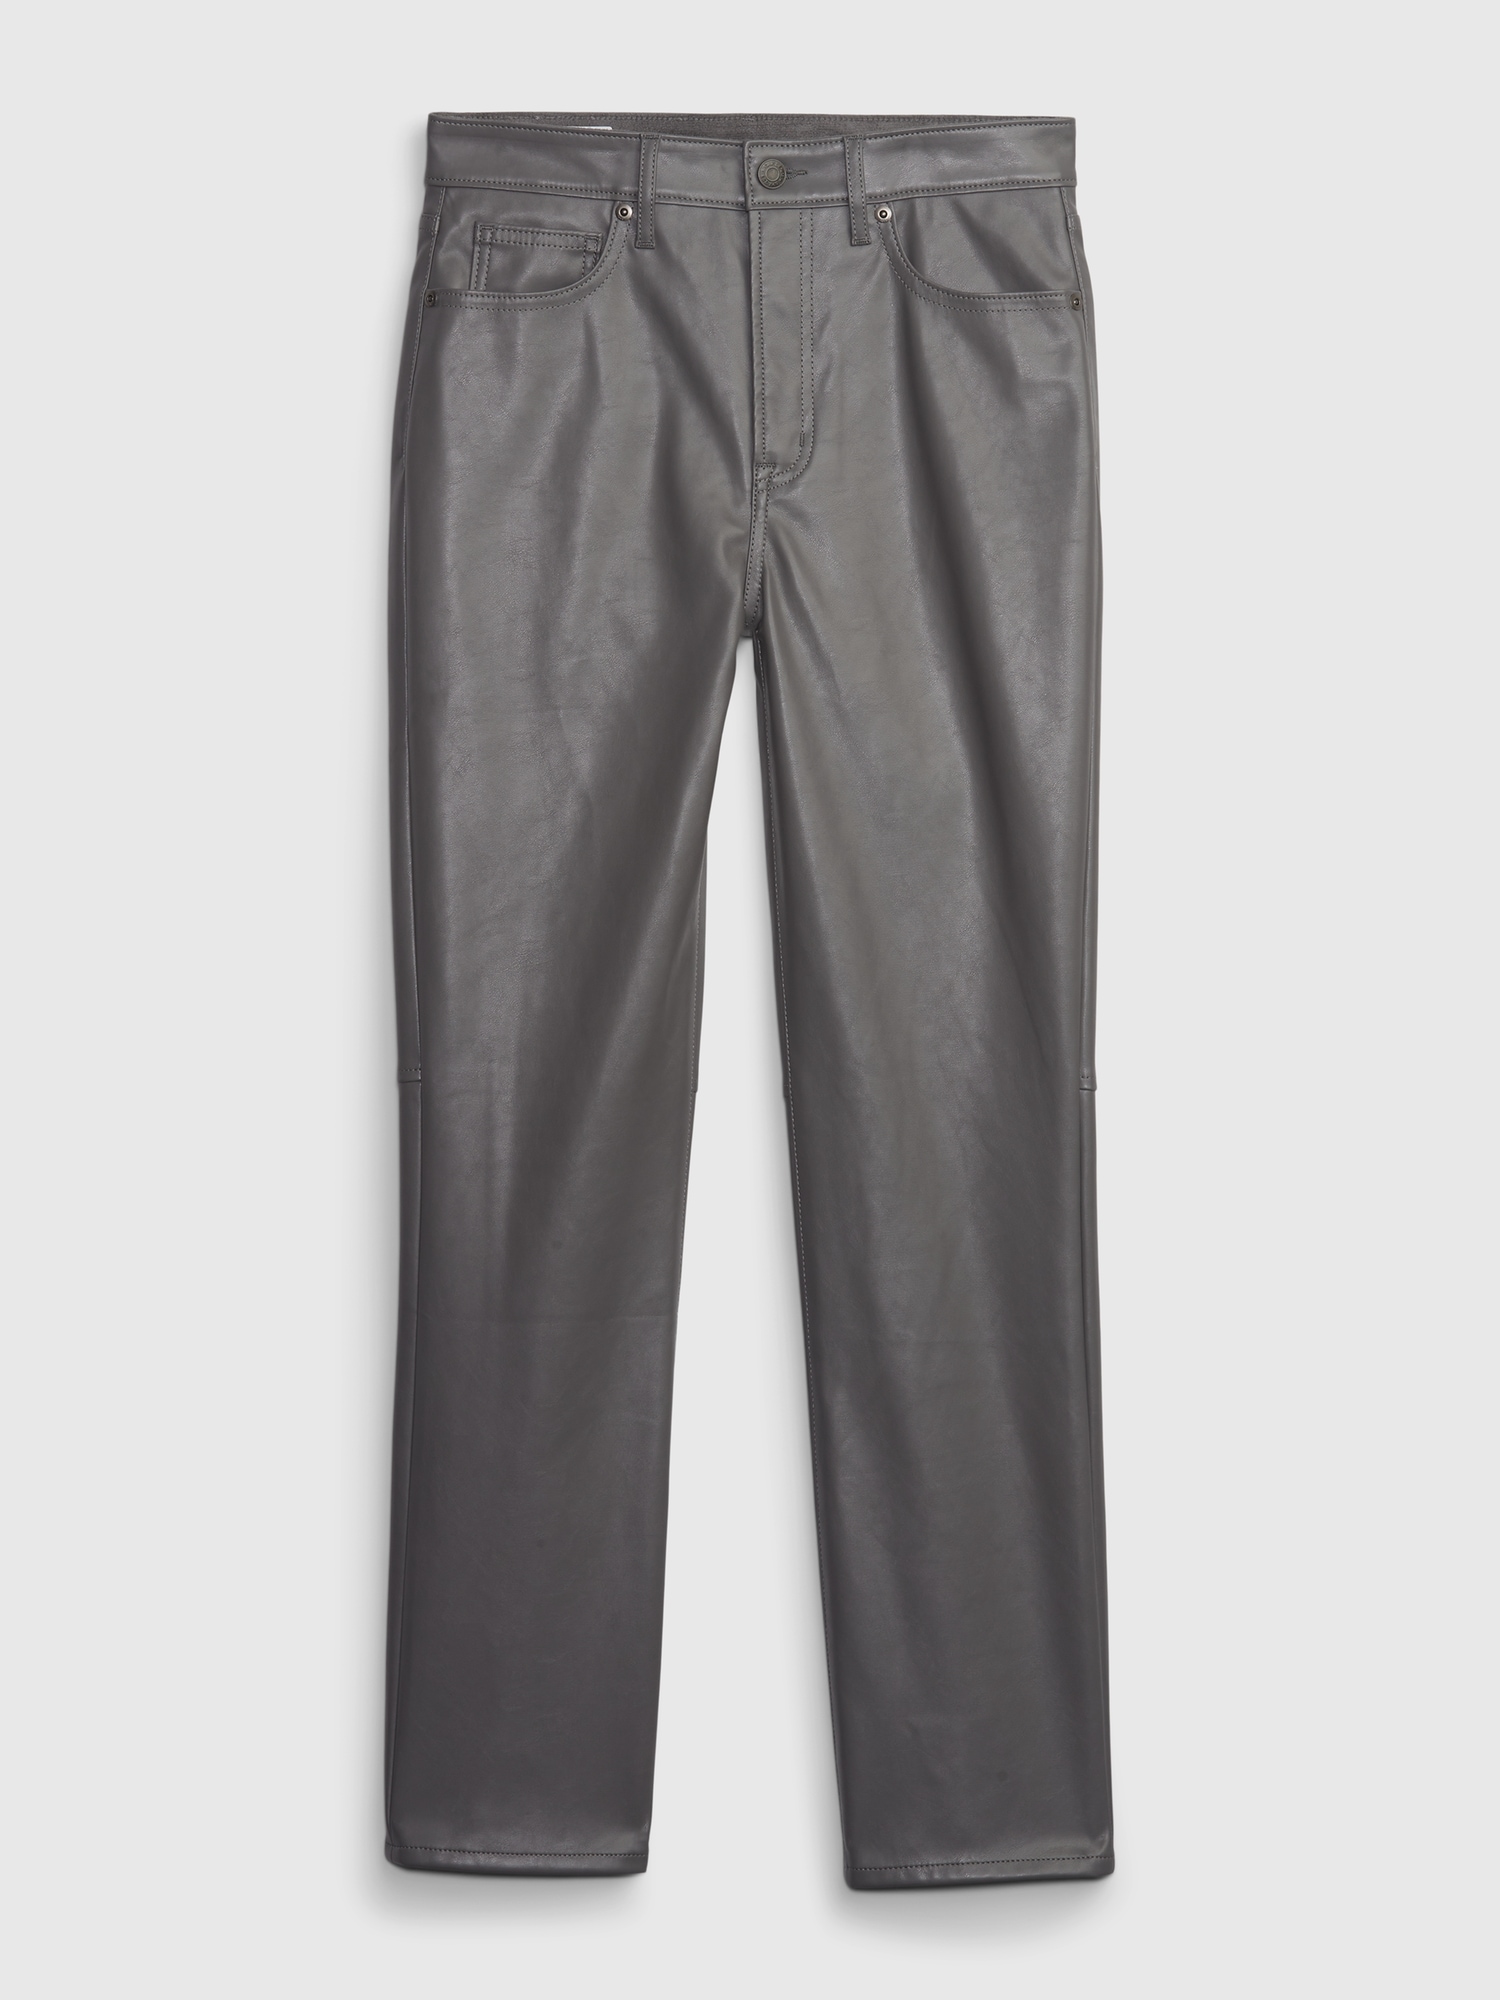 Smooth Fitting BLACK Vegan Leather PANTS L by A NEW DAY - Pants & Jumpsuits